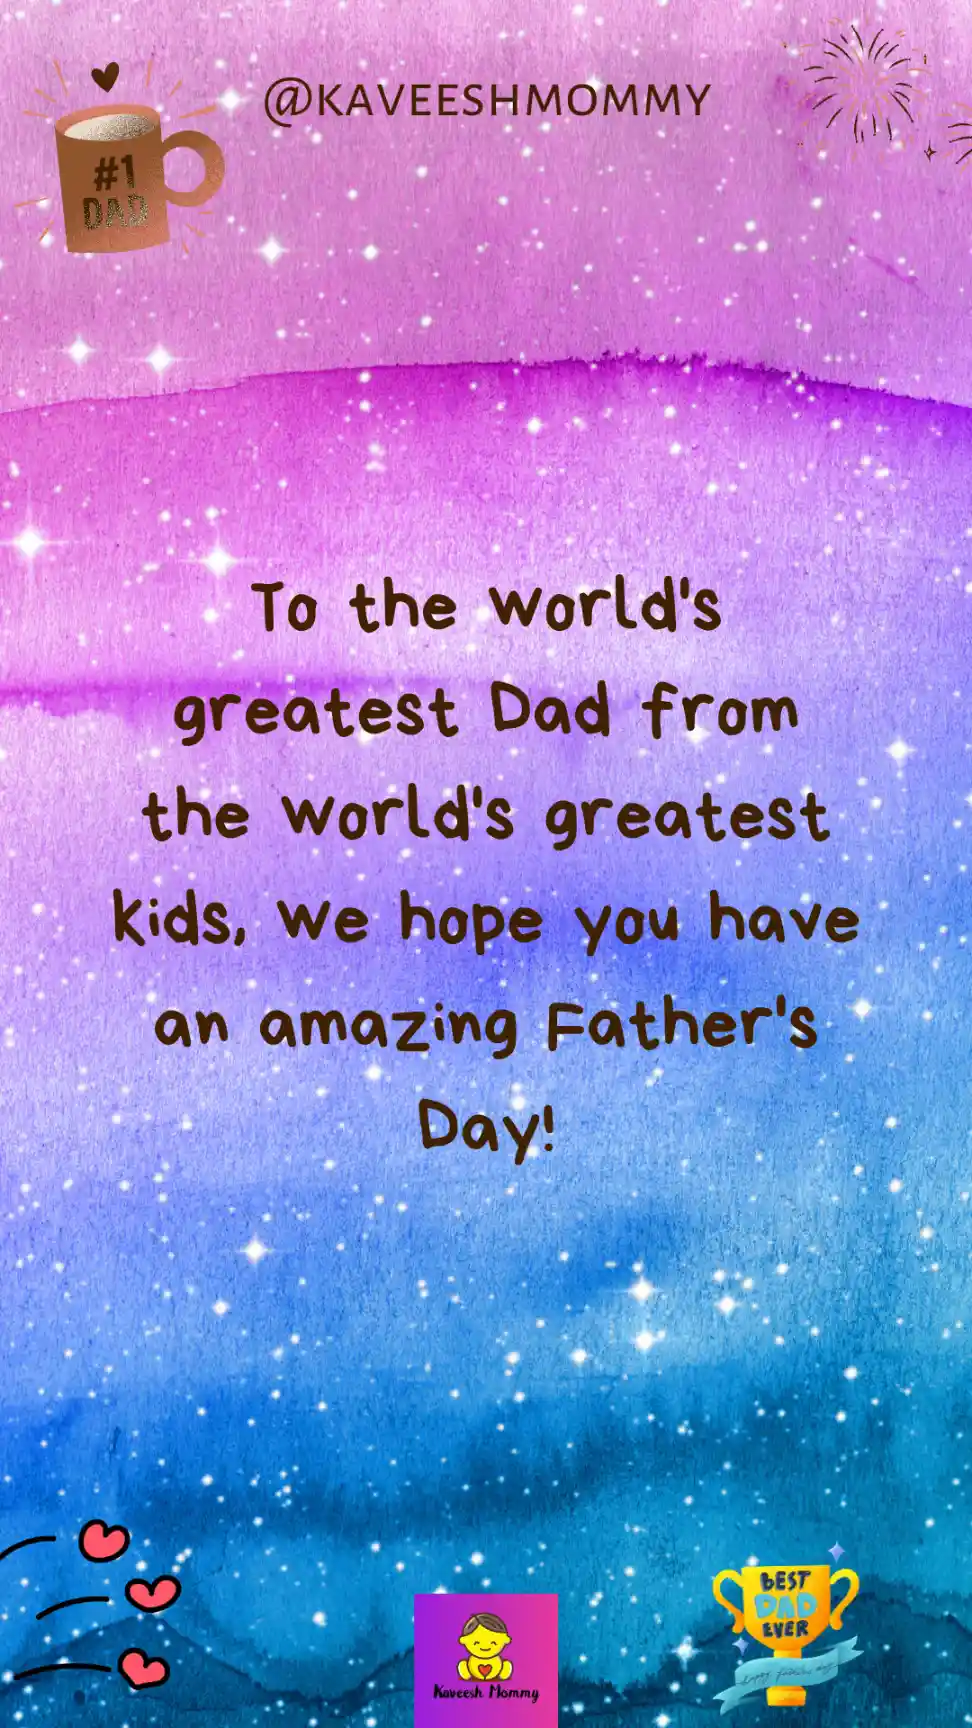 free happy father's day-To the world's greatest Dad from the world's greatest kids, we hope you have an amazing Father's Day!